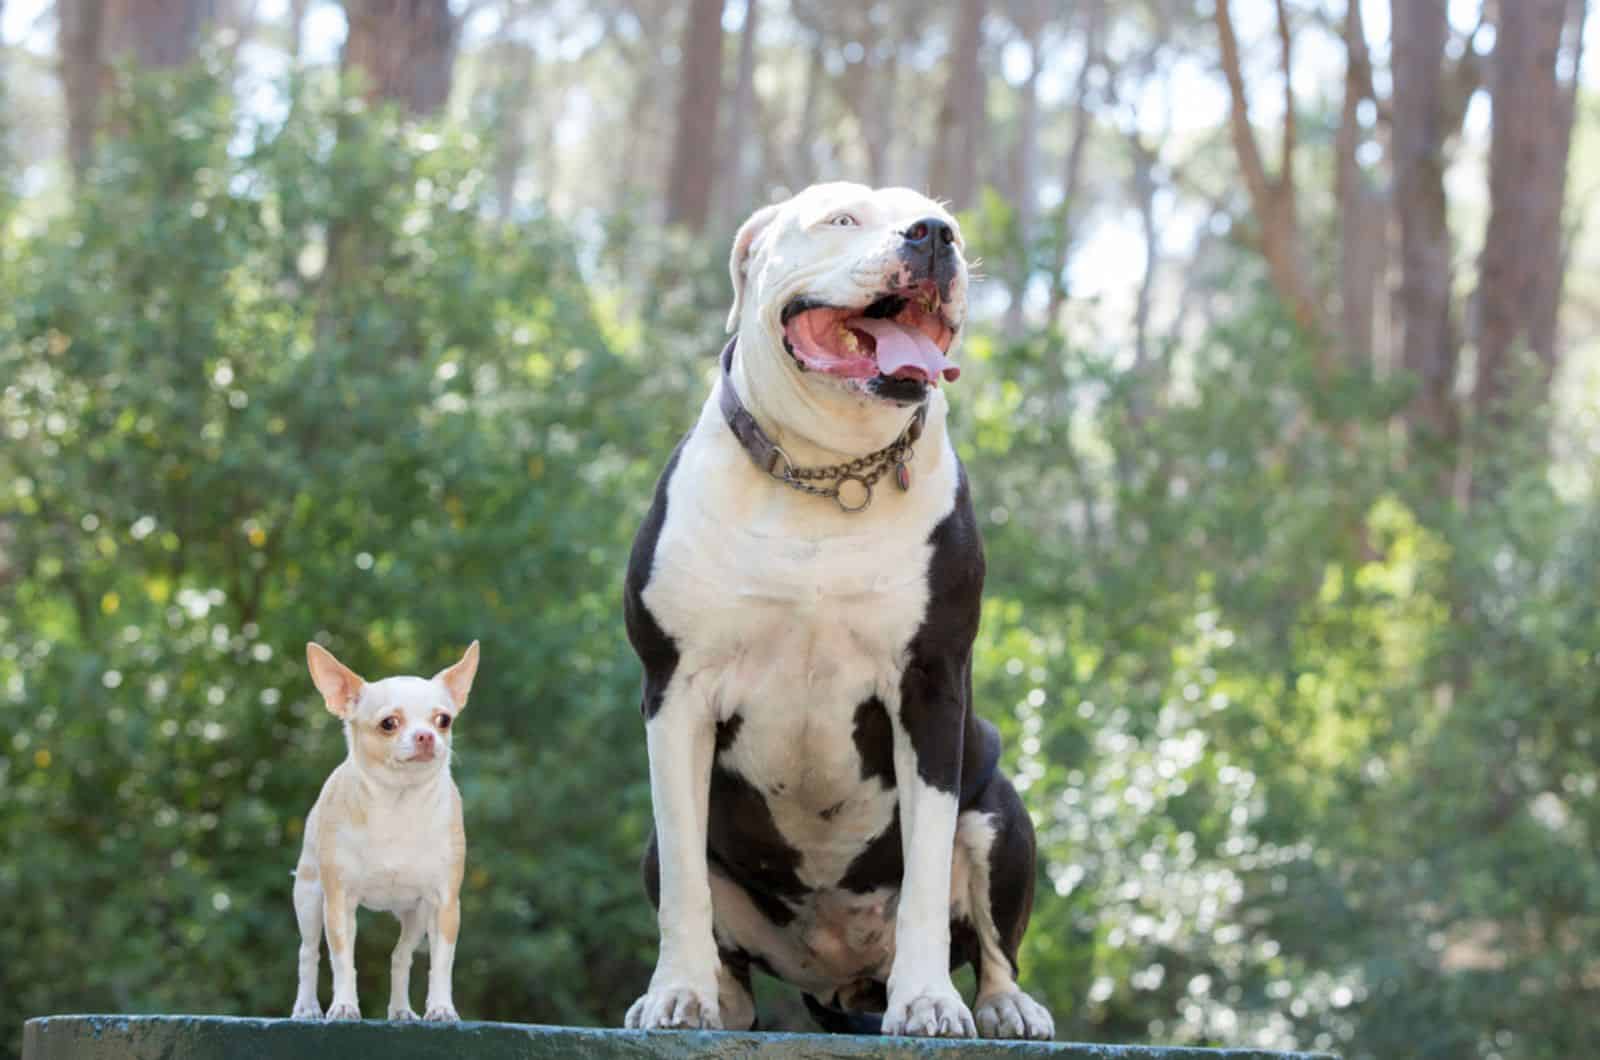 chihuahua dog and an american staffordshire terrier sitting together in nature